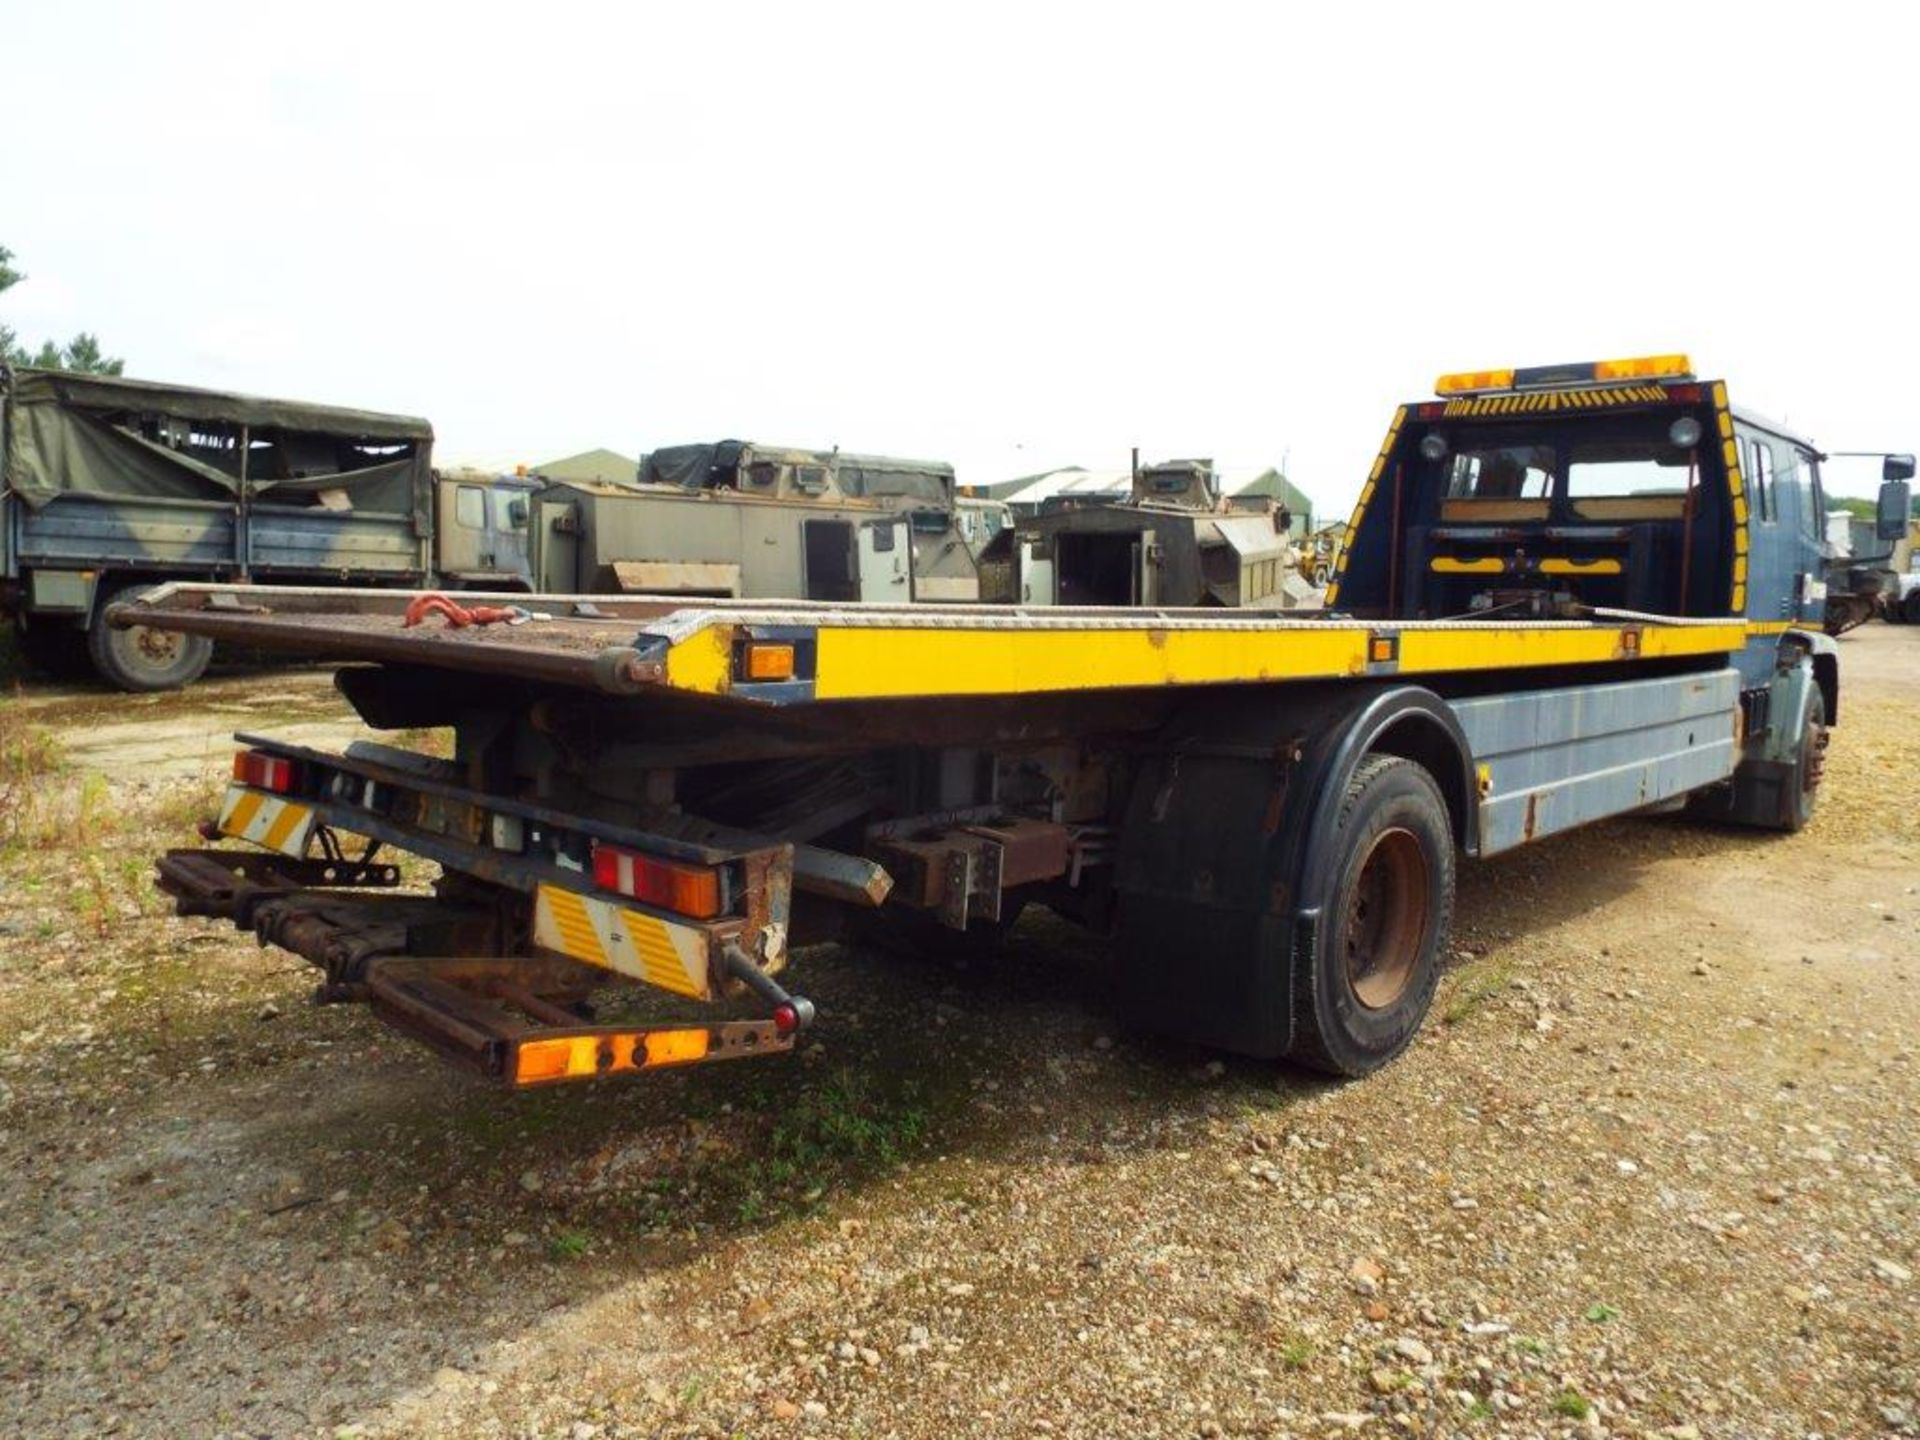 Leyland DAF 55 210 Crew Cab 18T Tilt and Slide Recovery Vehicle with Underlift and 2 x Winches - Image 7 of 32